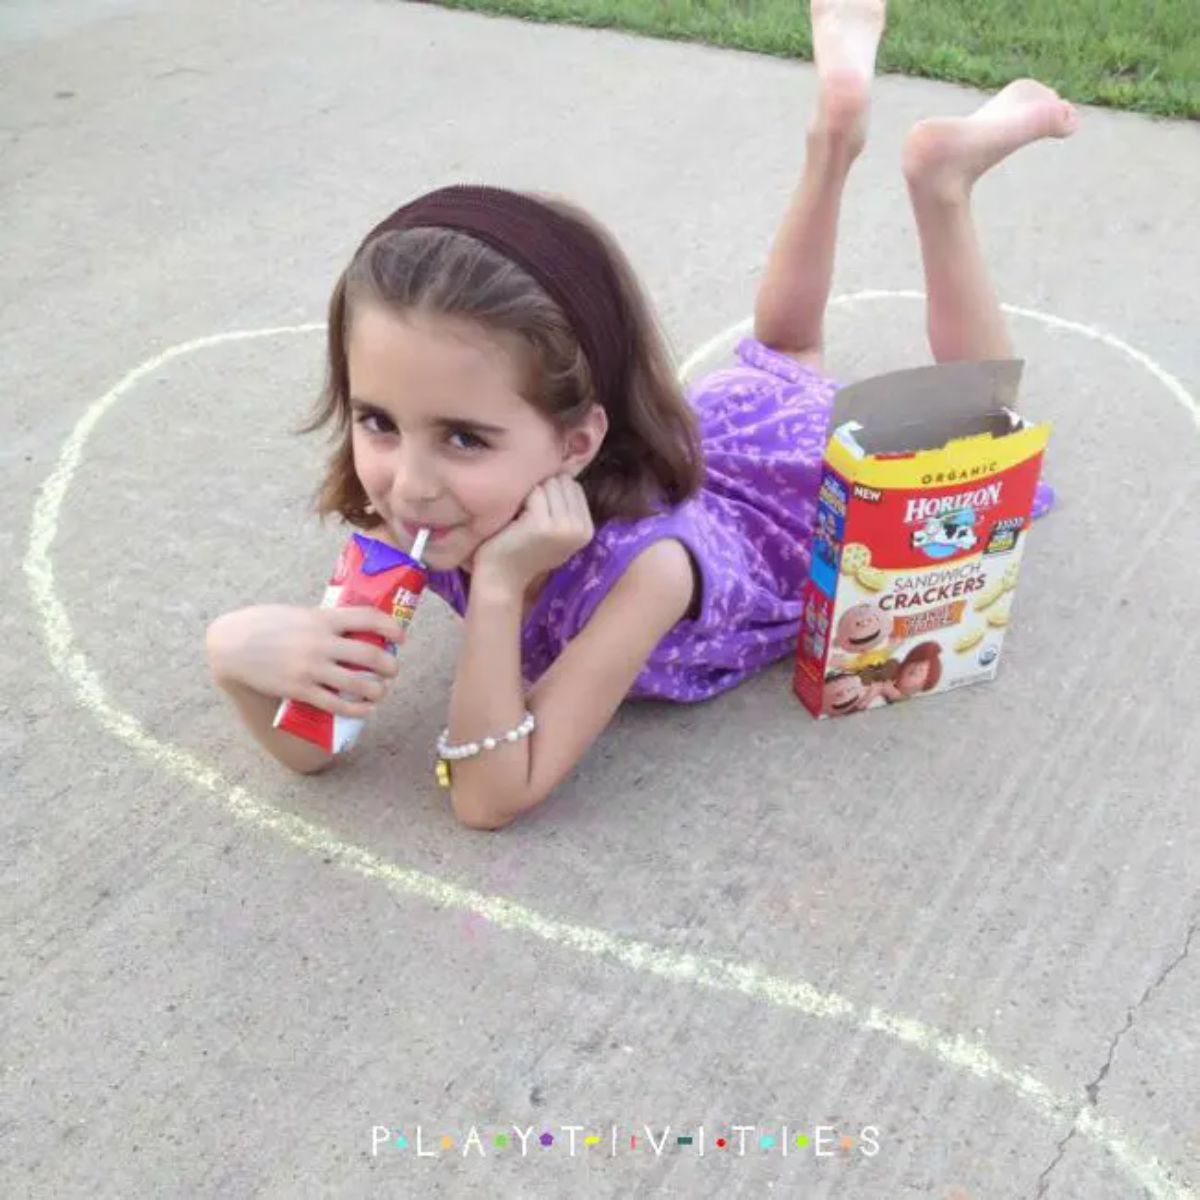 a girl in a purple dress lays on her front on the sidewalk drinking from a juice box through a straw. A box of crackers sits by her side and a chalk outline surrounds her